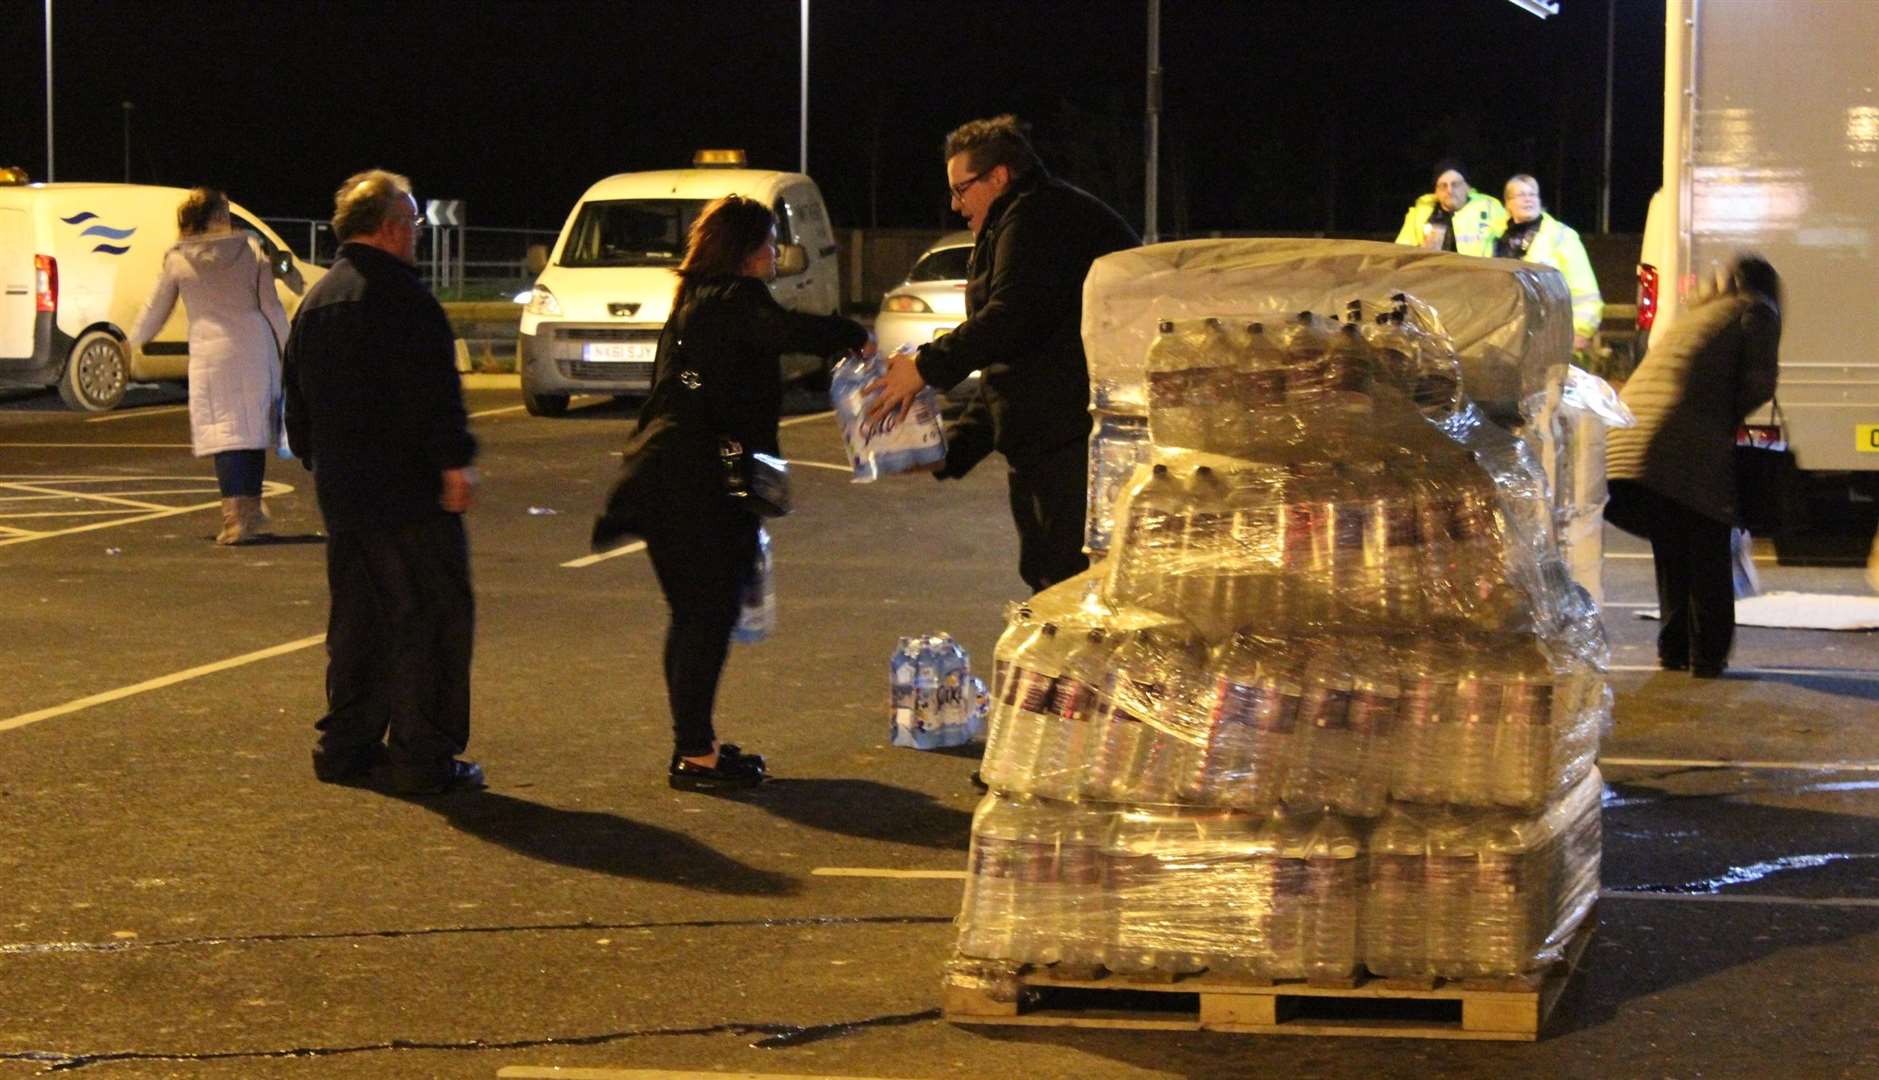 Cllr Cameron Beart helped hand out supplies of bottled water at Morrisons, Sheppey, in Ja nuary 2016 (1388812)